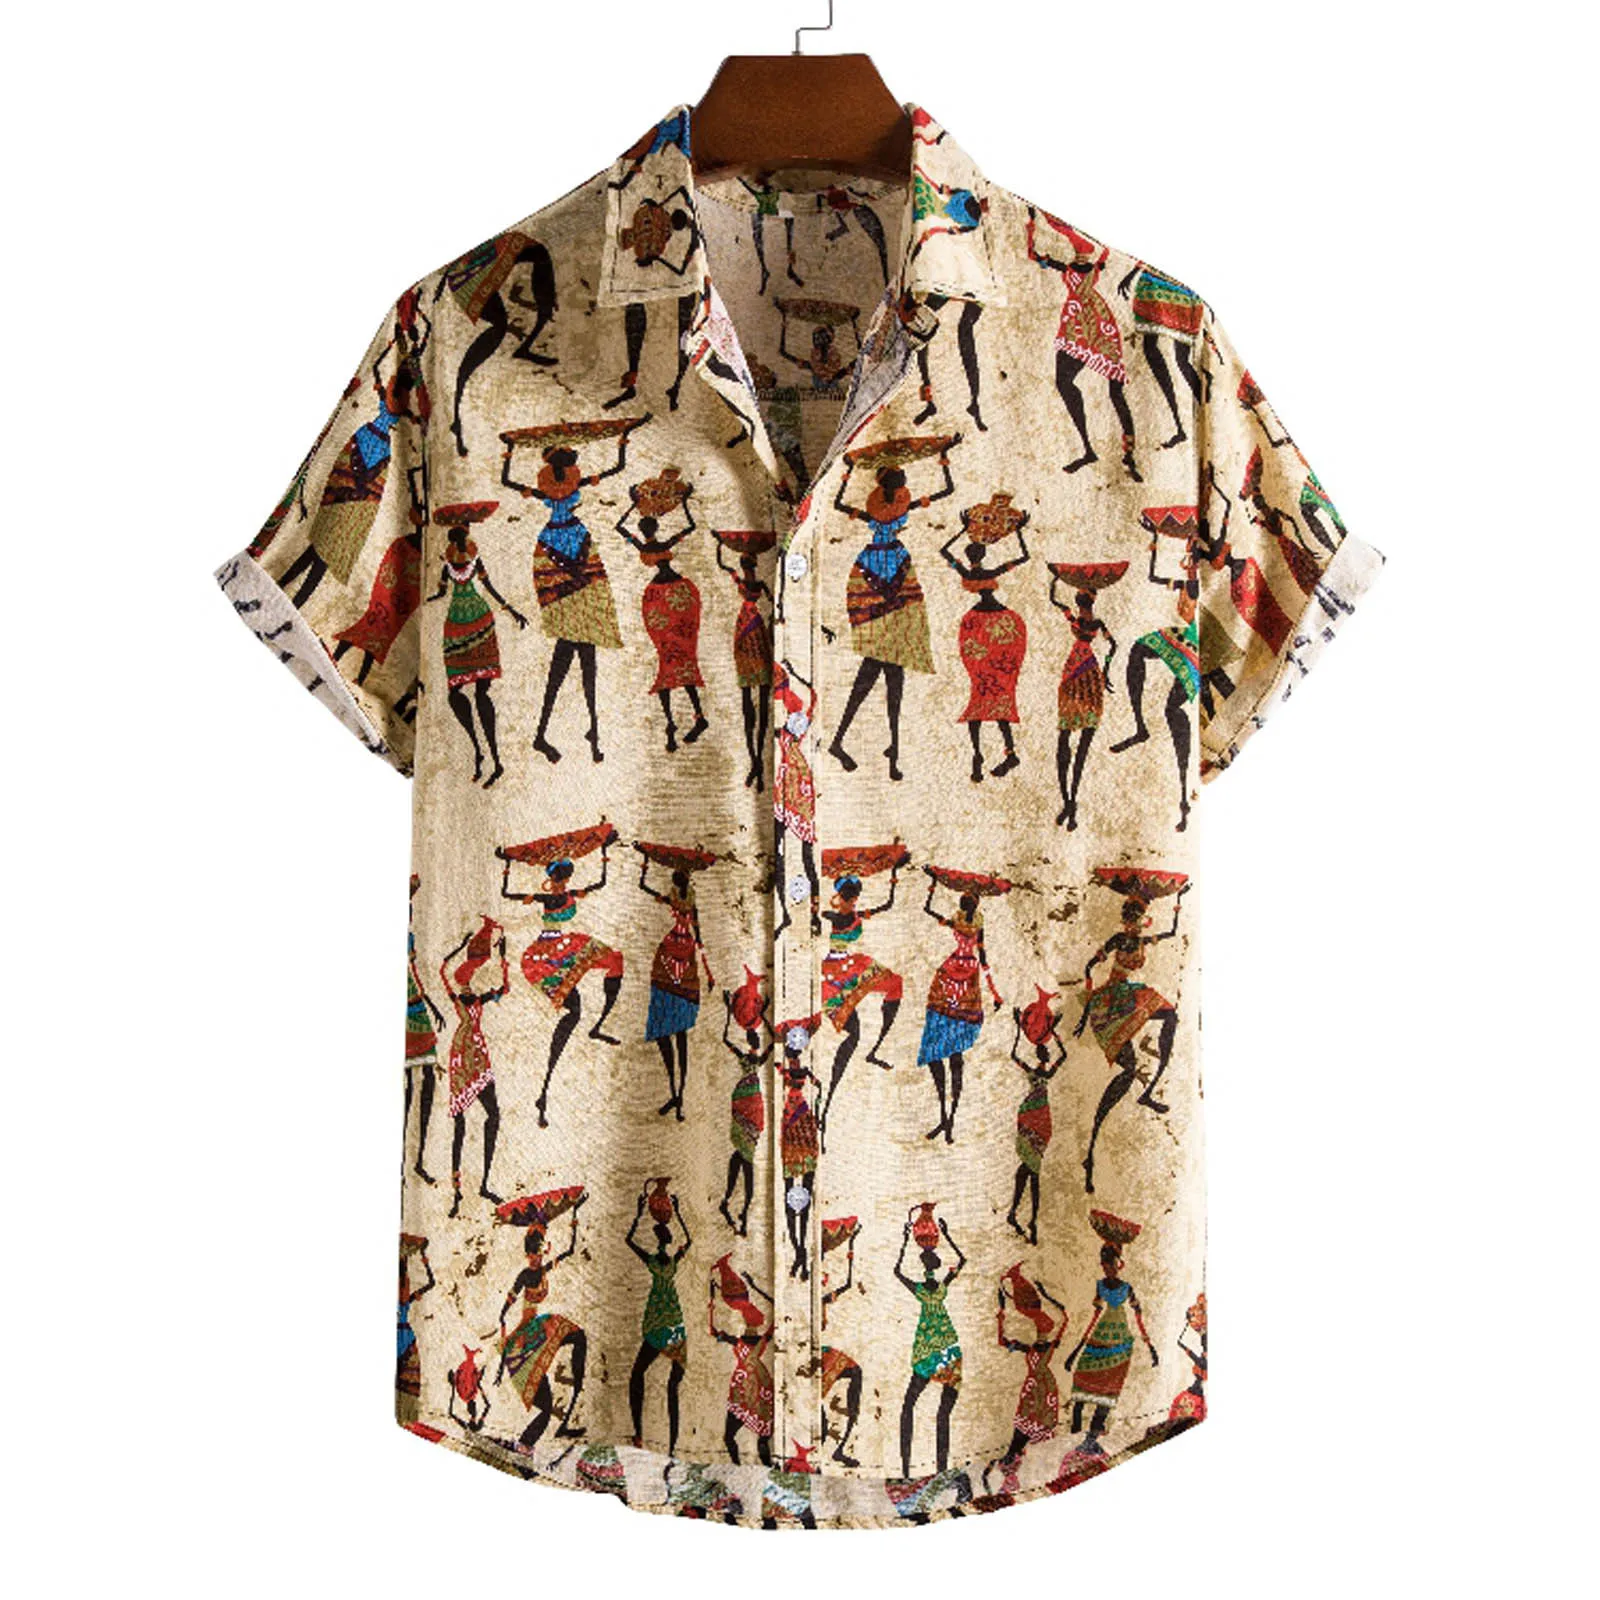 Mens Vintage African Colorful Floral Shirt Casual Shirt Short Sleeve Blouse Tops 